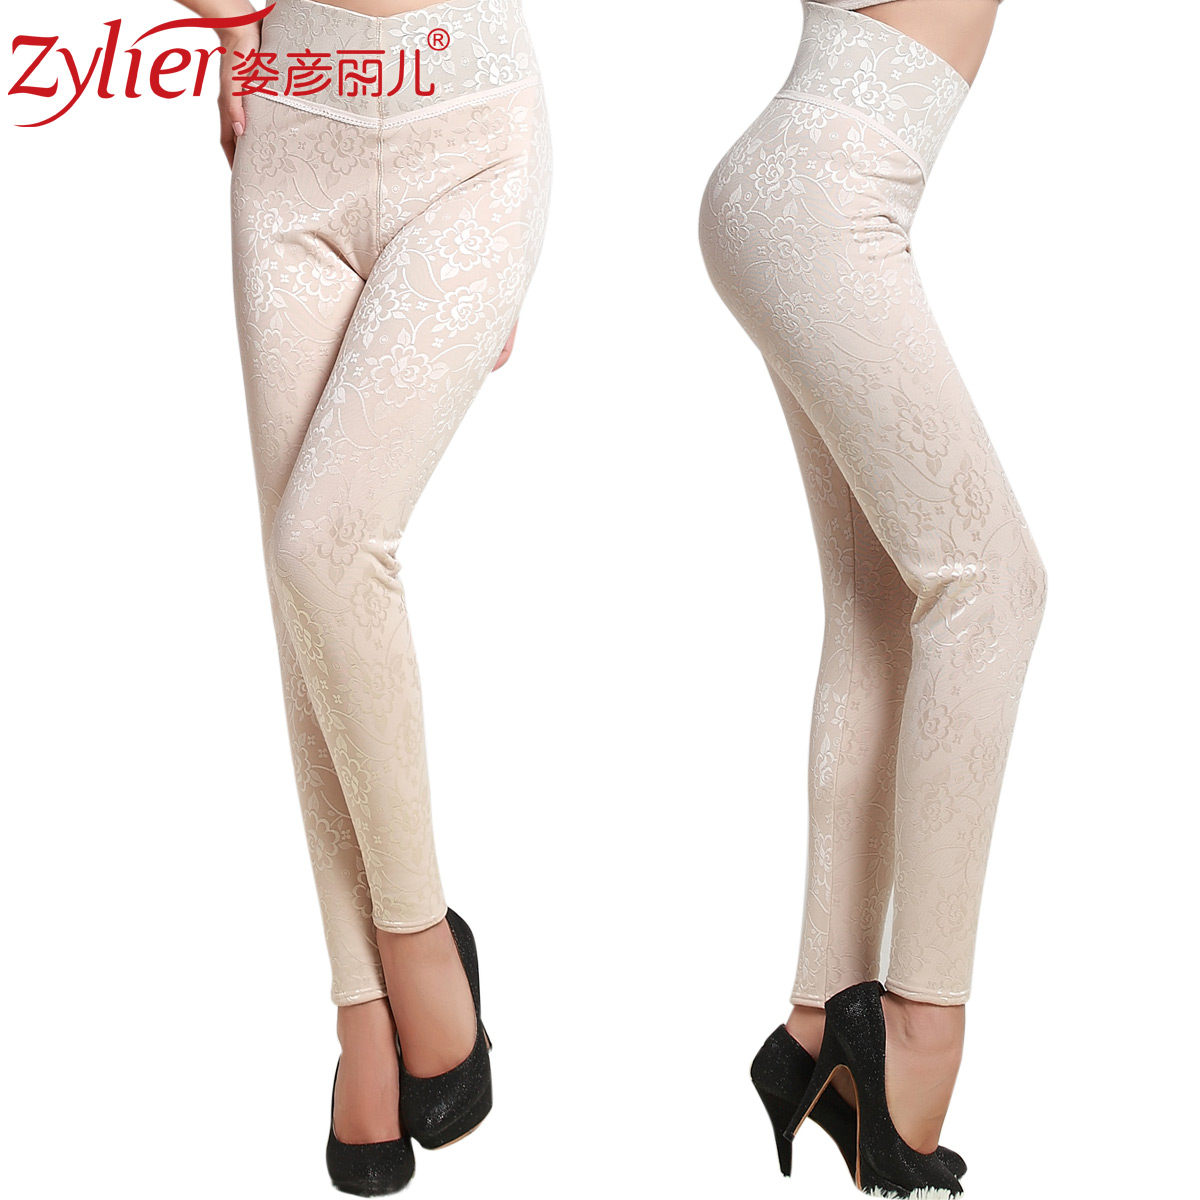 2012 autumn high waist abdomen drawing butt-lifting magnetic therapy body shaping thermal legging bk113